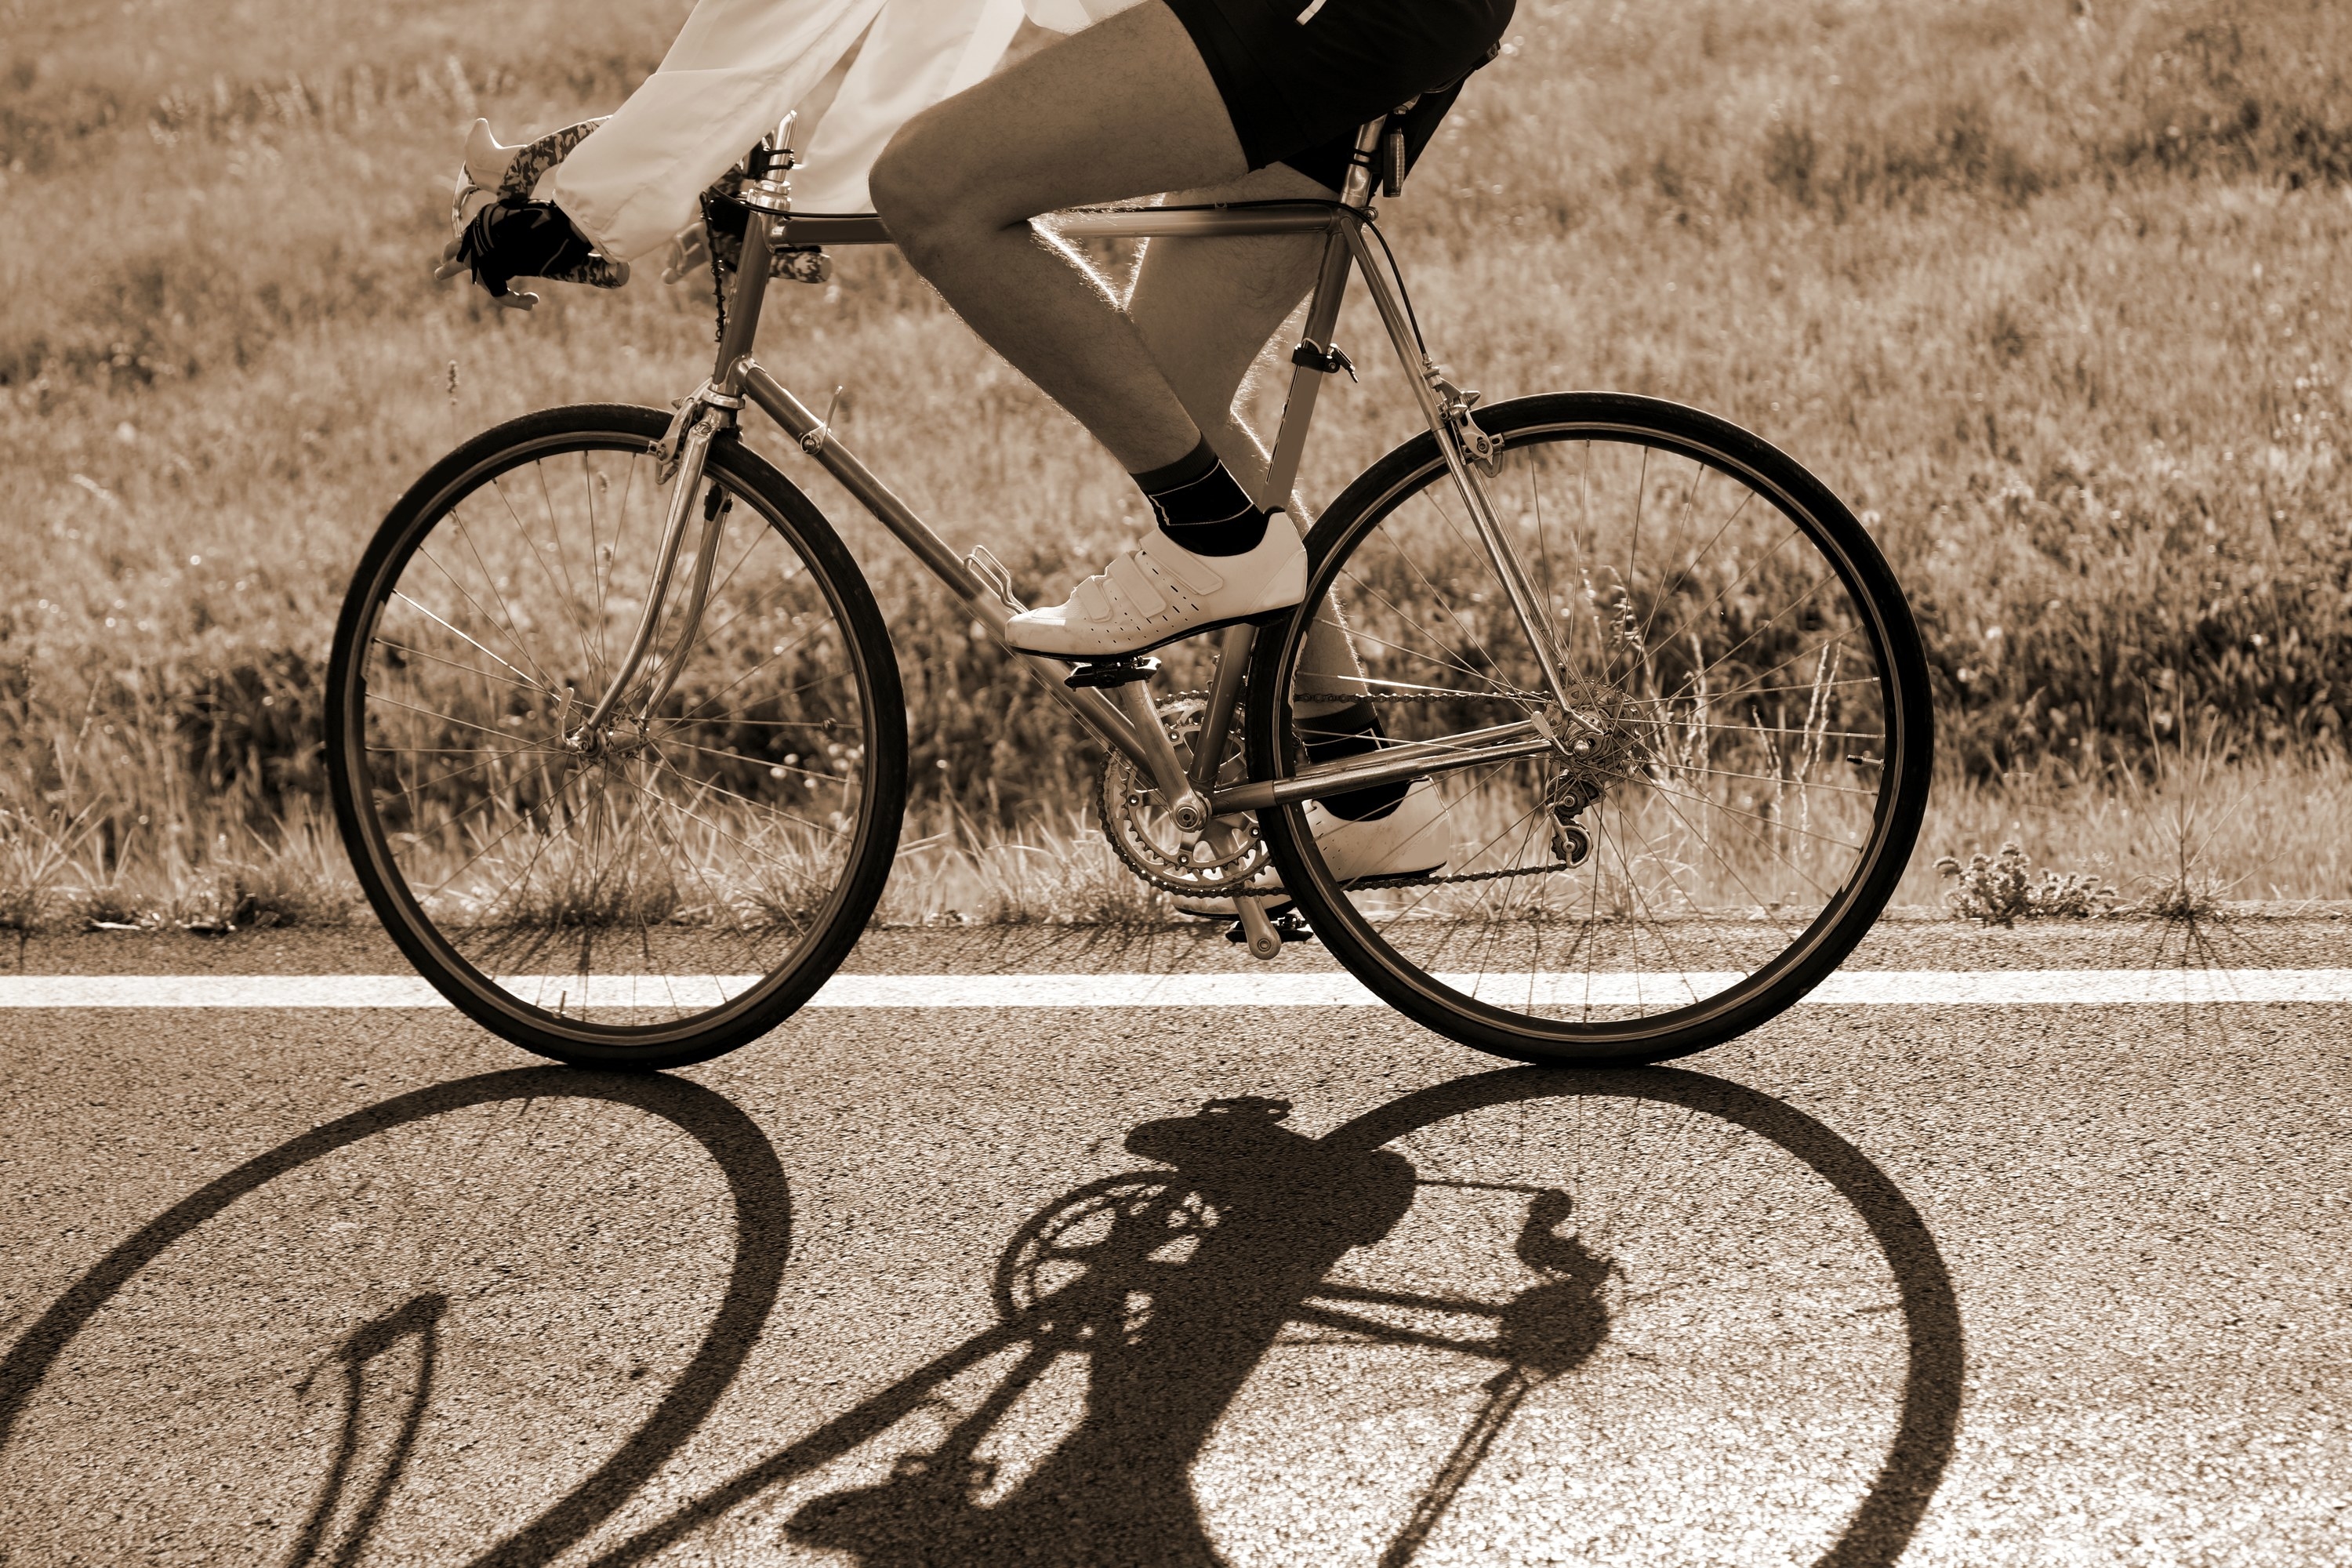 person biking on the side of a road, with grass in the background and their shadow in the foreground